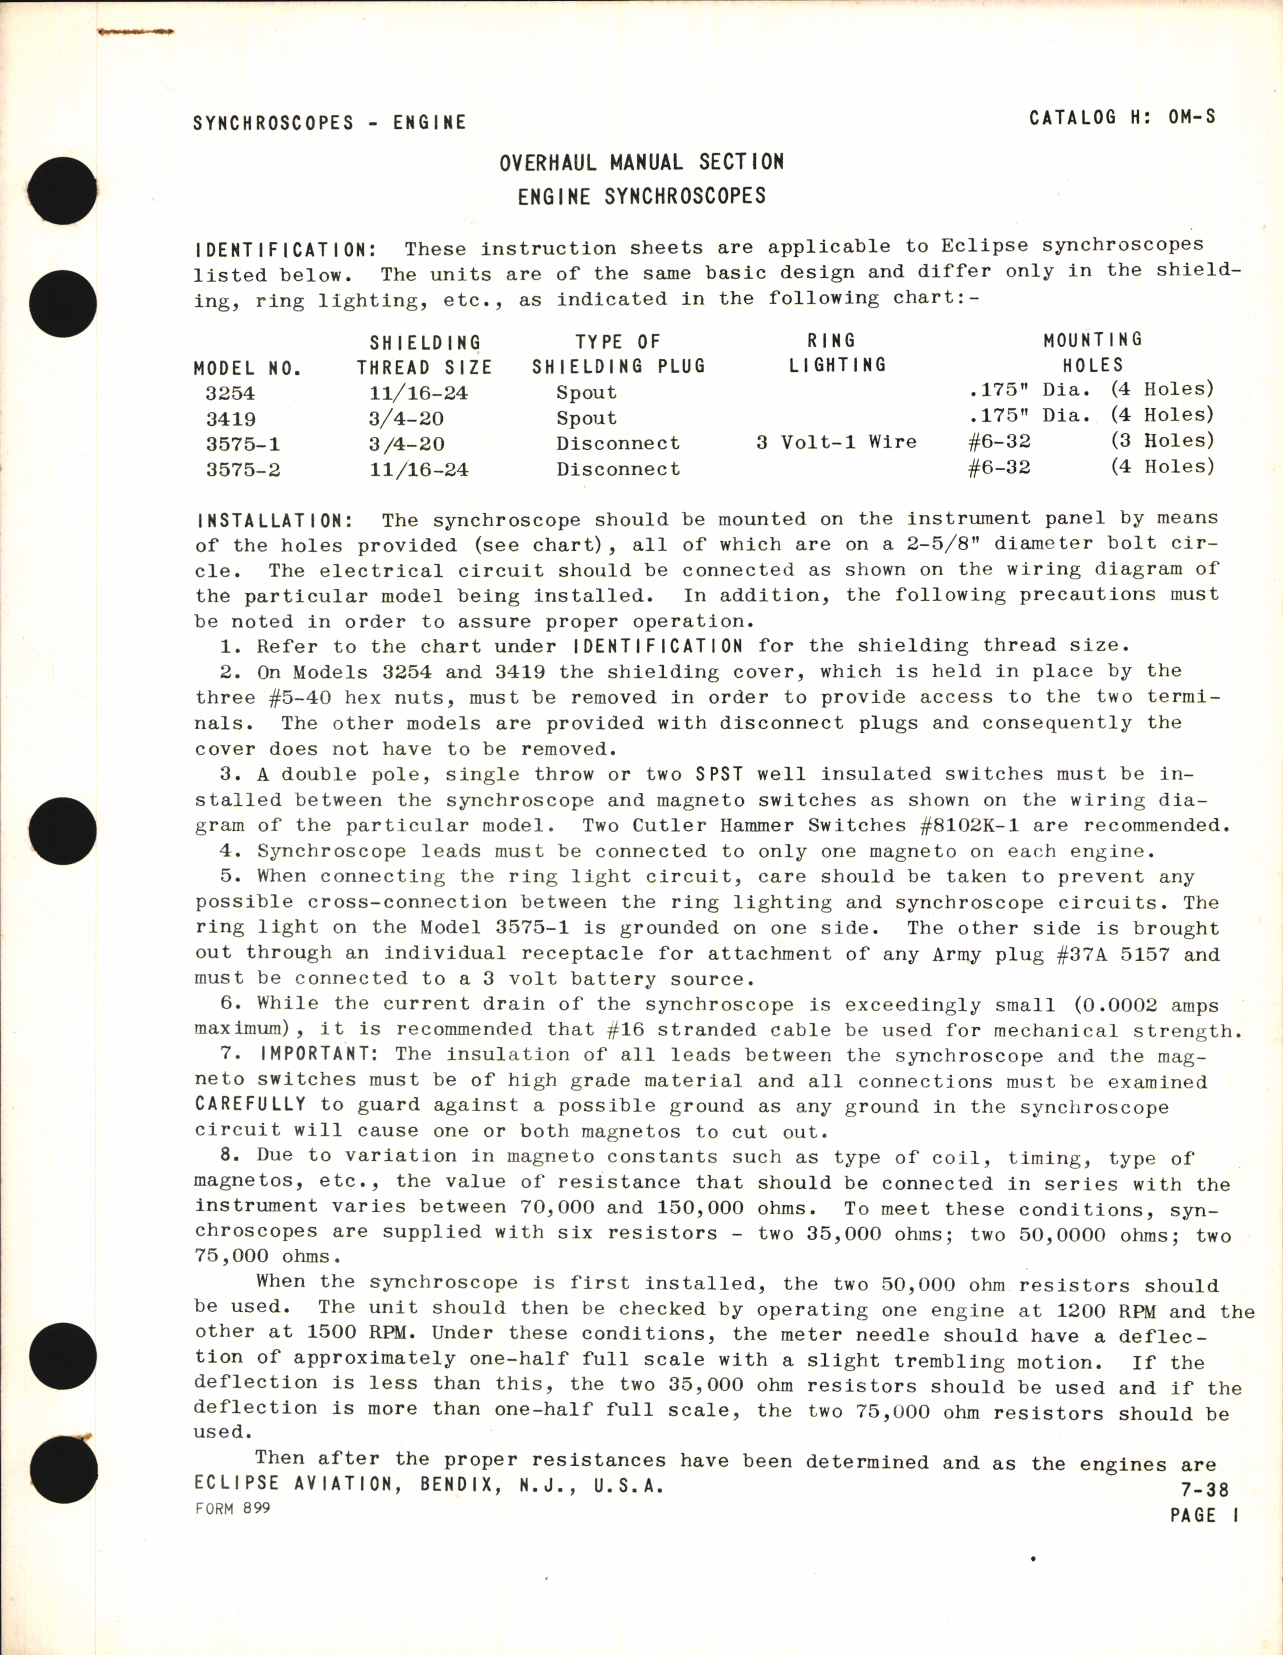 Sample page 1 from AirCorps Library document: Overhaul Manual Section - Engine Synchroscopes